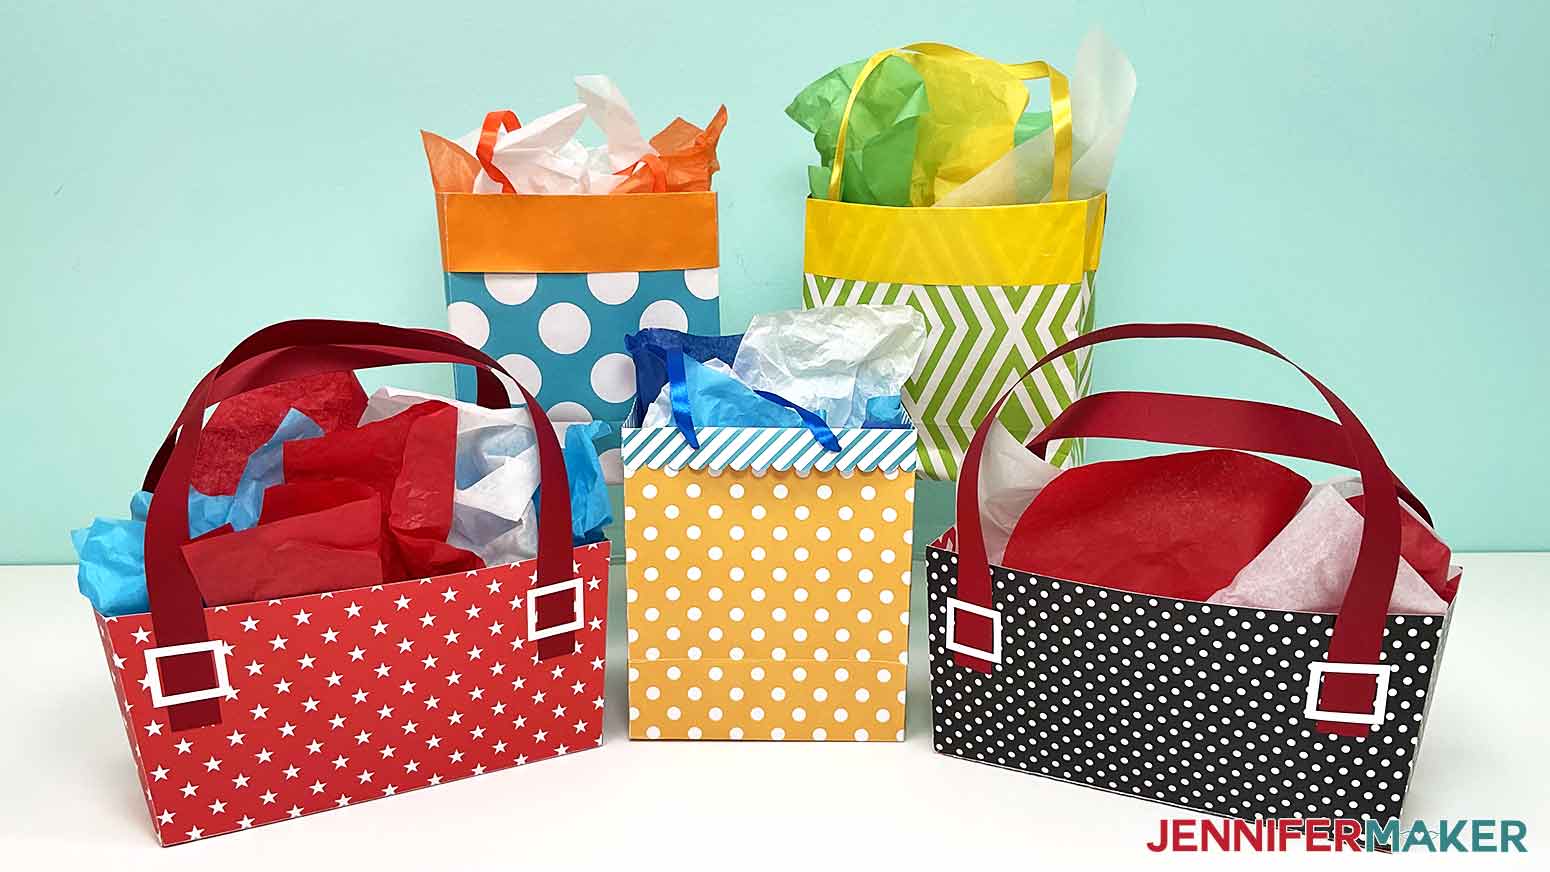 A photo showing five finished DIY gift bags with tissue paper inside. Two bags are made of wrapping paper, two are purse-shaped, and one is made of cardstock.